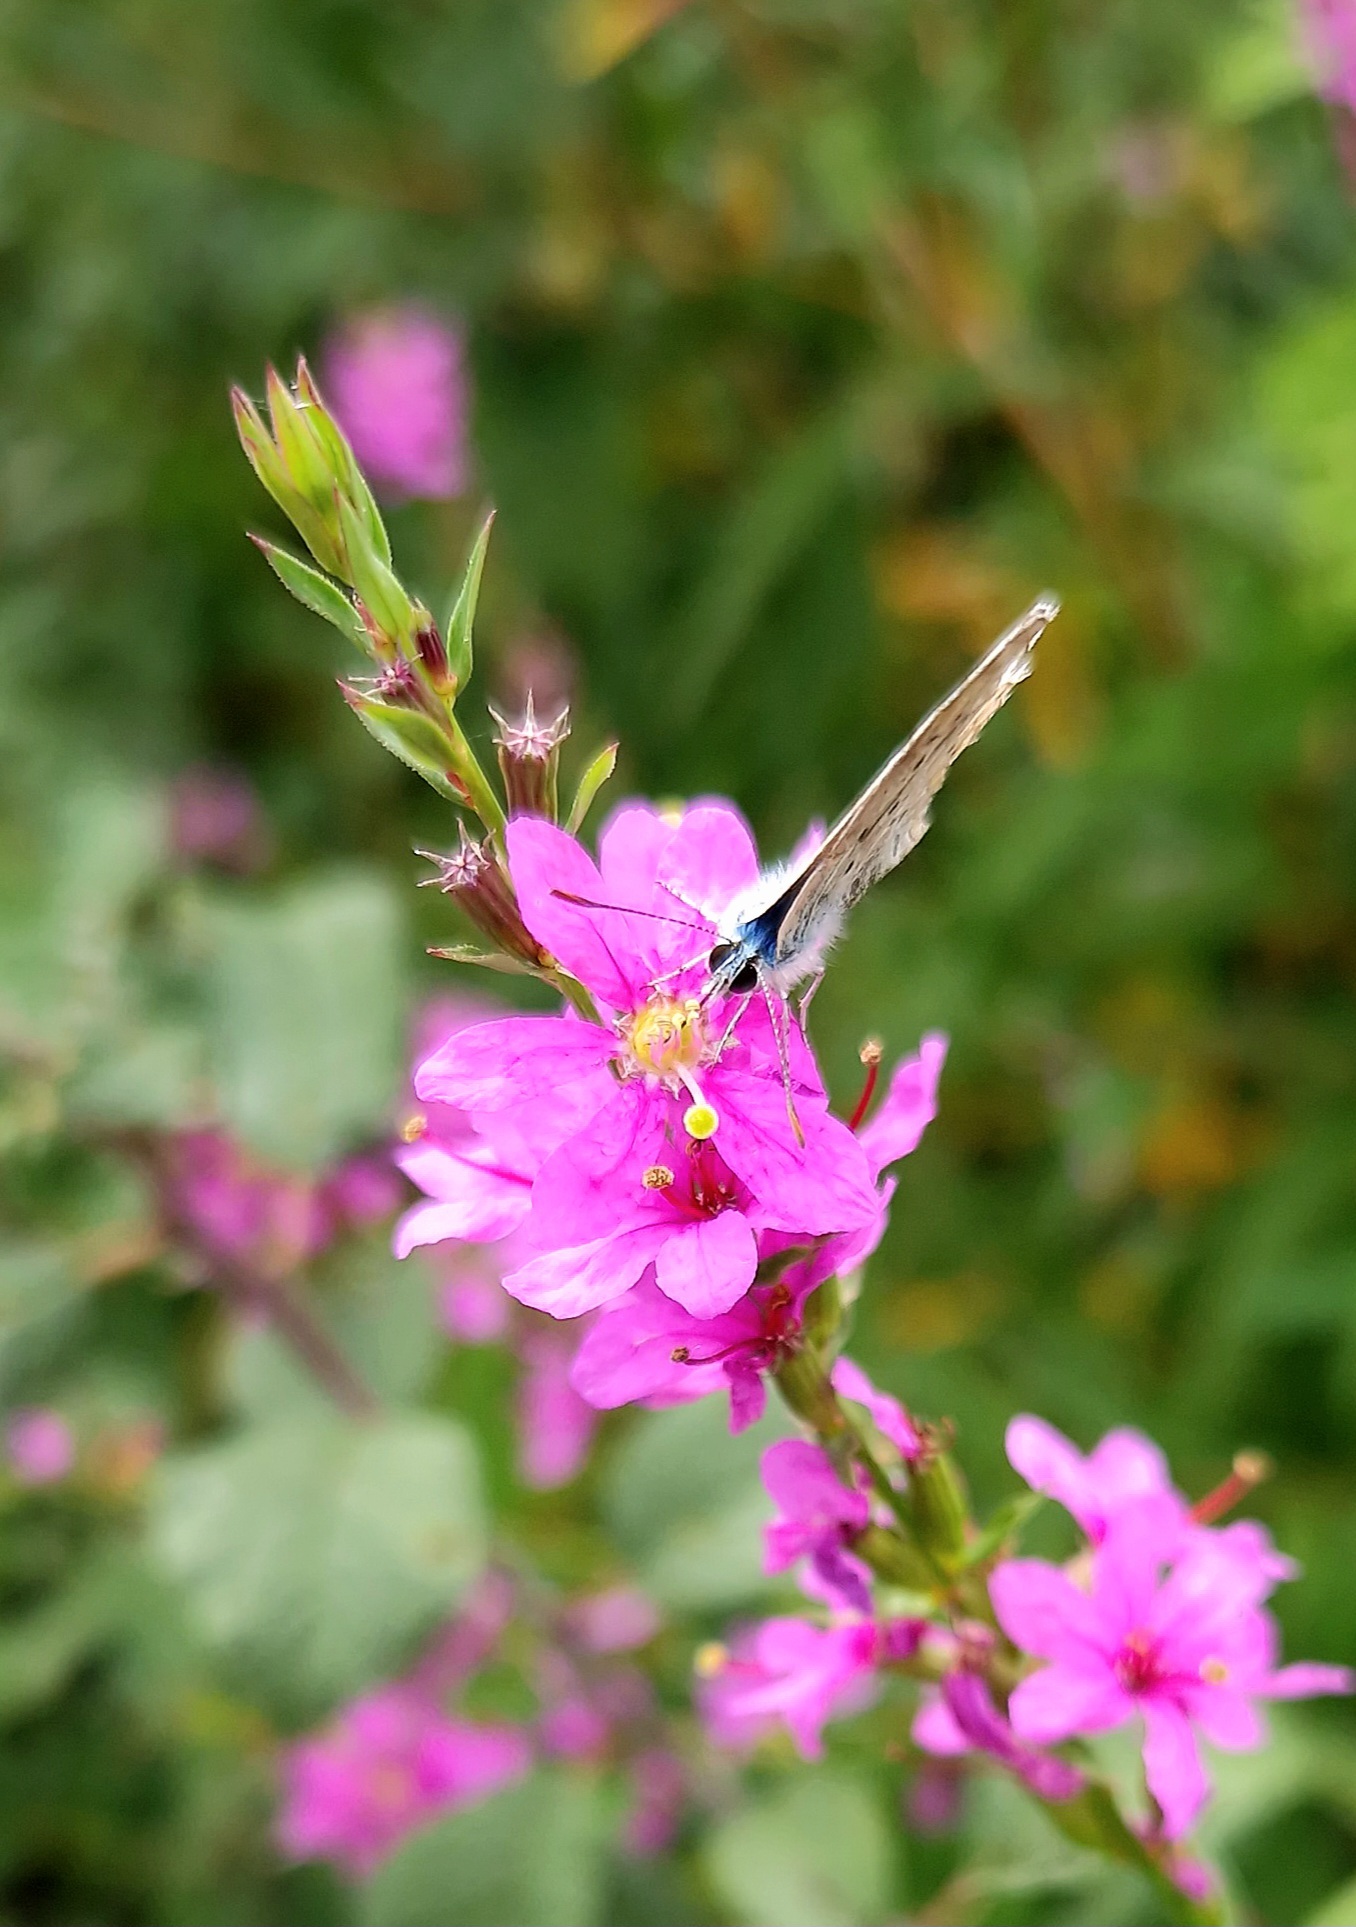 Post #11554693 - My, Summer, Heat, Butterfly, Flowers, Steppe, Entomology, Vertical video, Insects, Plants, Macro photography, Video, Longpost, Mobile photography